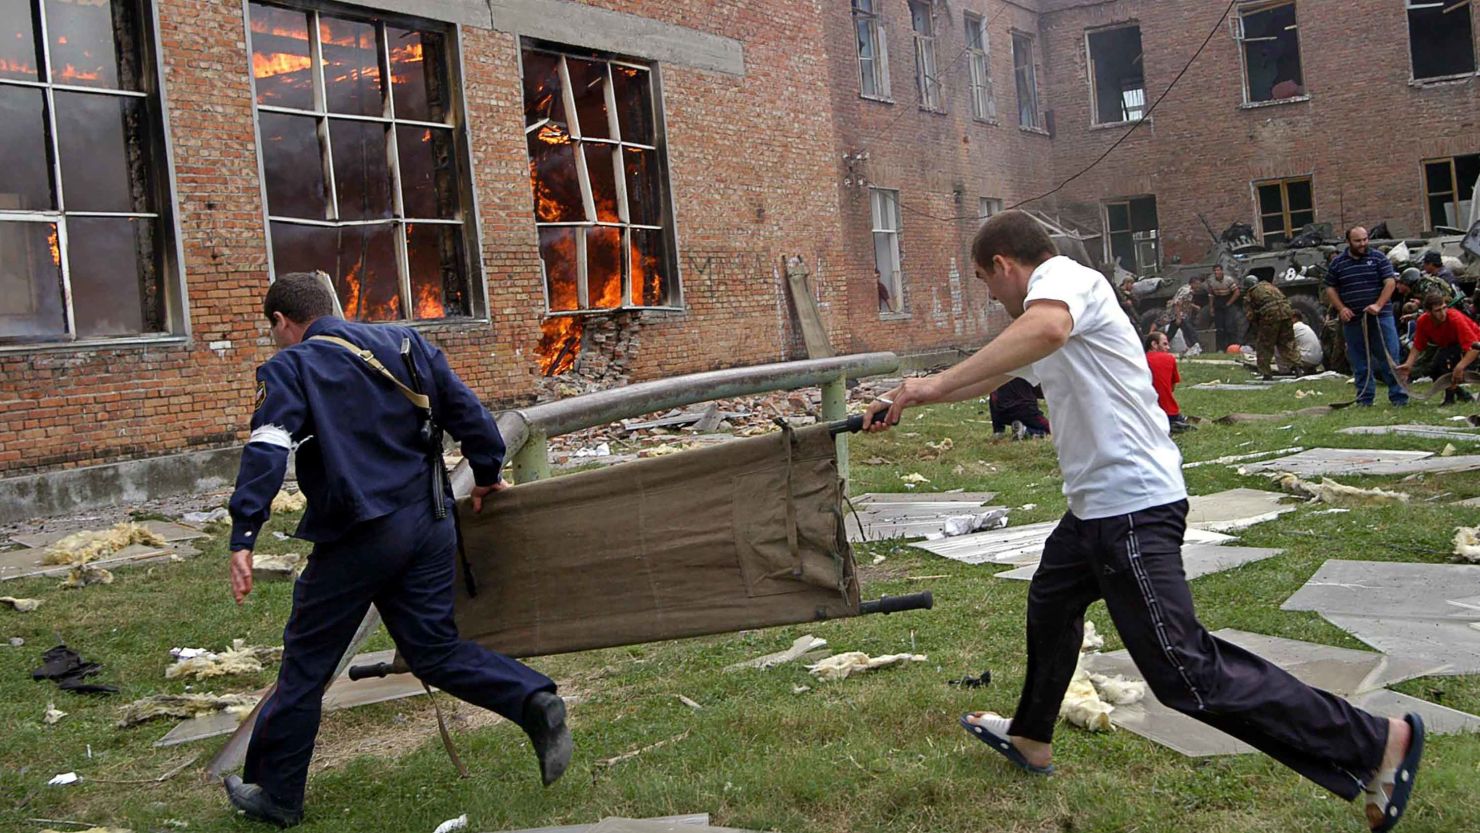 Two volunteers carry a stretcher as they approach the burning school during the rescue operation in Beslan, northern Ossetia, 03 September 2004.